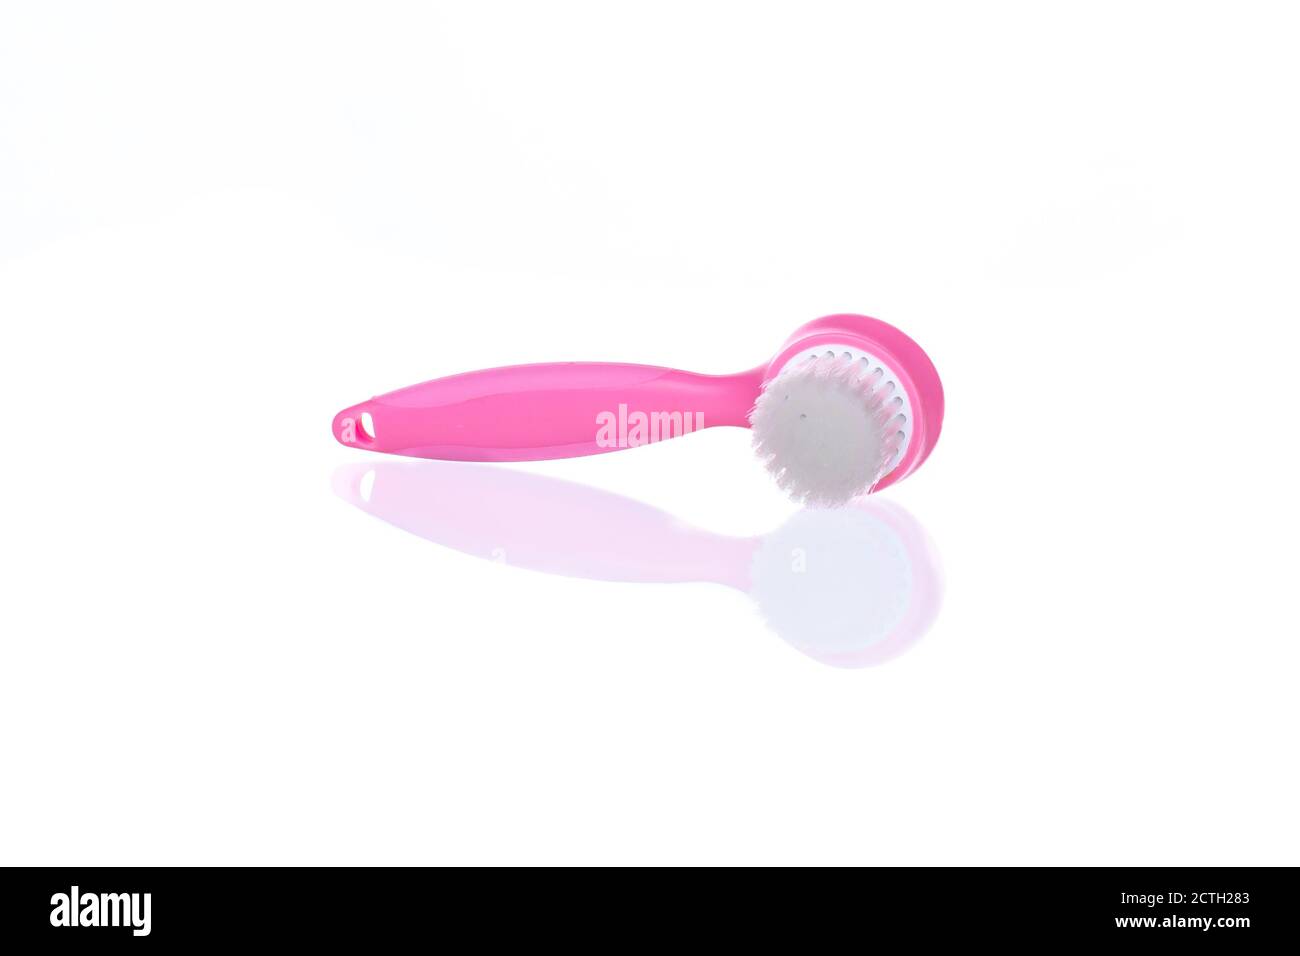 Pink facial cleansing brush on white background image